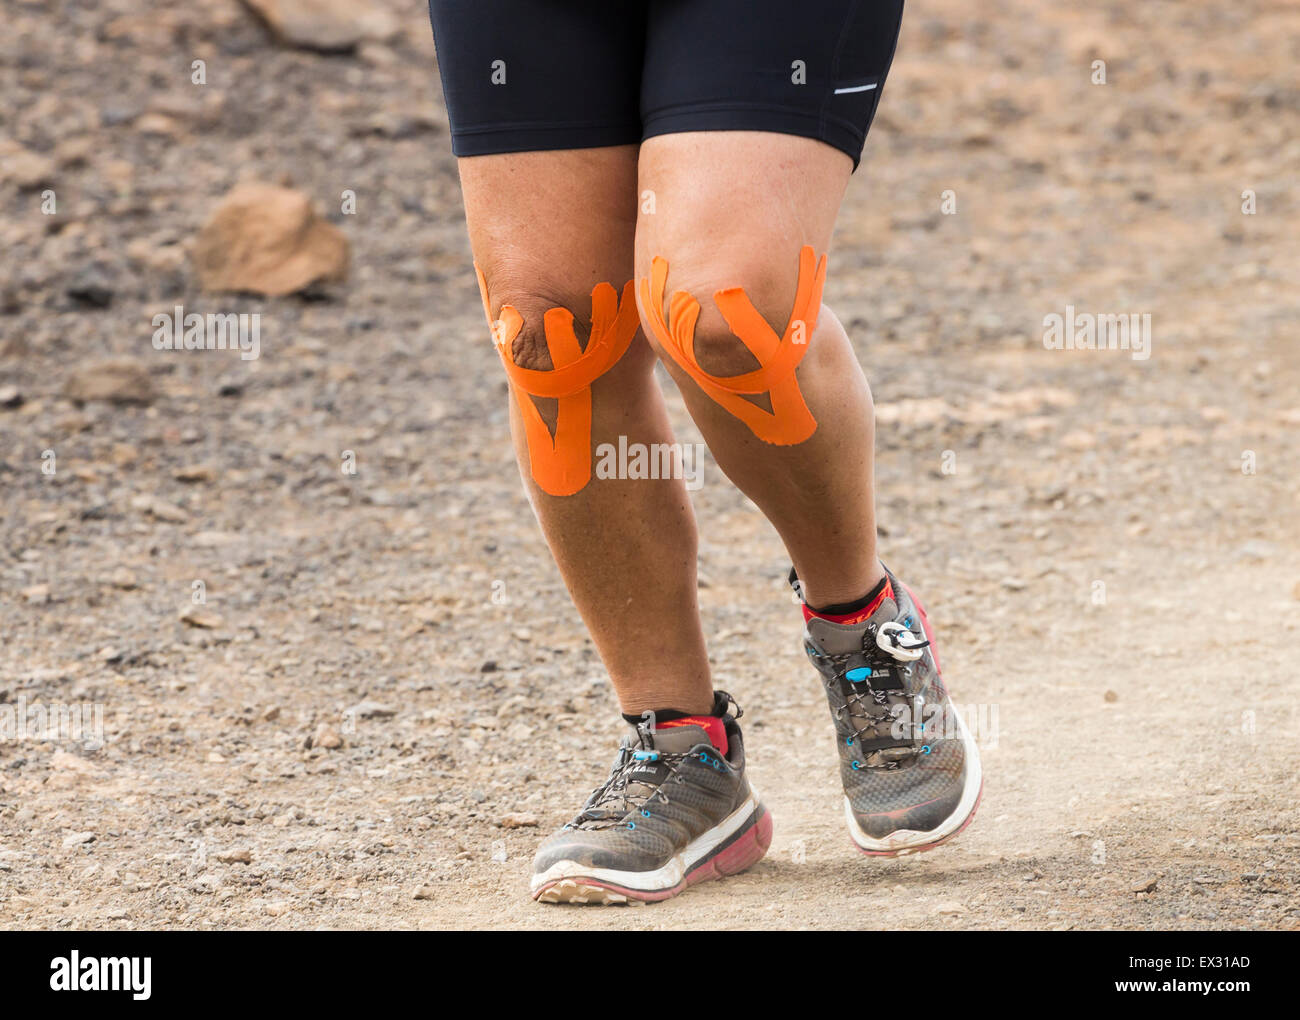 Heavy female runner wearing elastic therapeutic tape (KT Tape, Kinesiology tape..) on knees during trail race Stock Photo